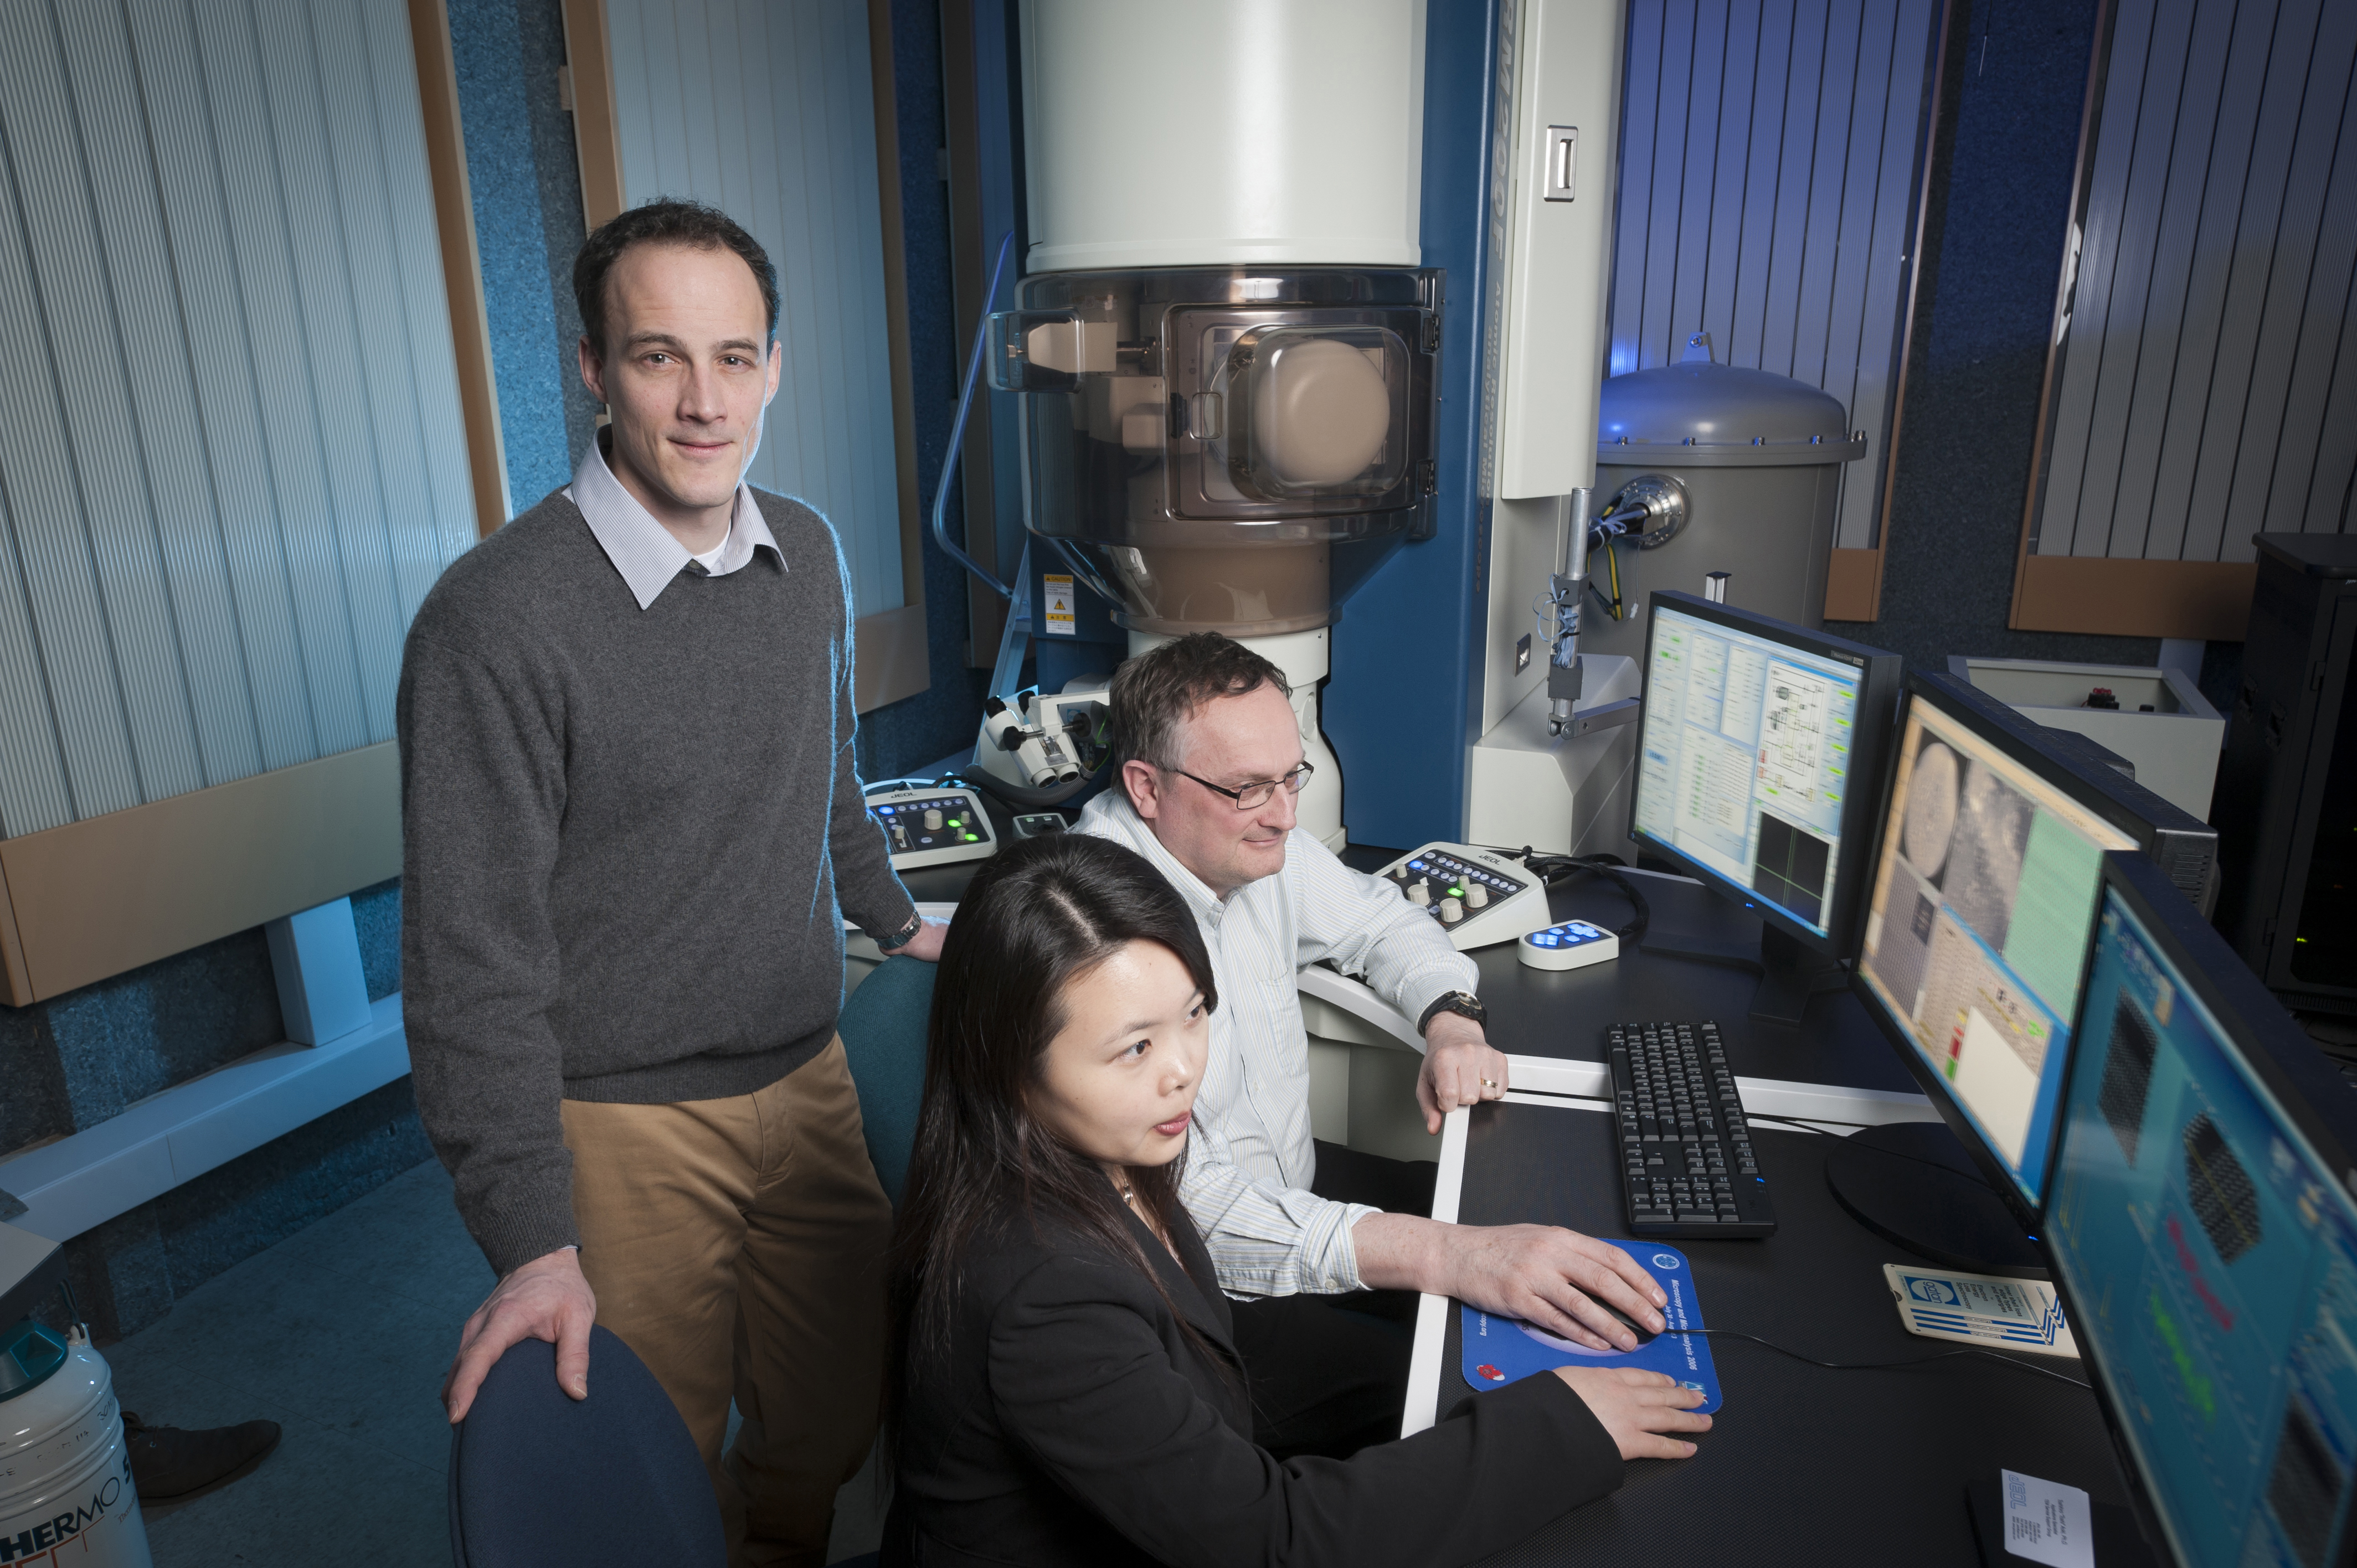 Dr. Robert Klie at University Illinois Chicago with JEM-ARM200F Atomic Resolution Microscope